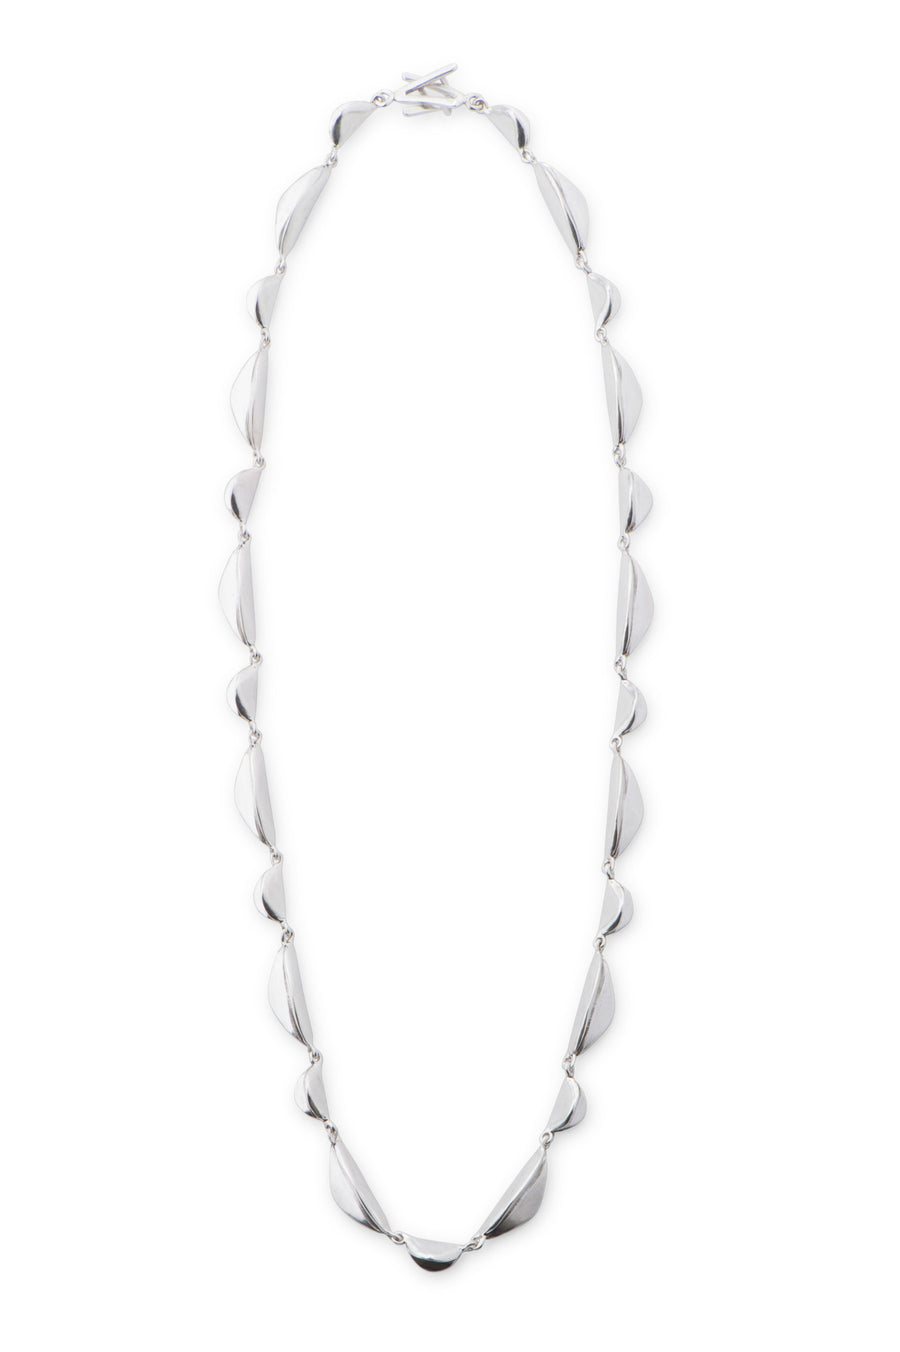 handmade, sculptural sterling silver chain linked necklace. Designed and crafted by Sky Phaebl